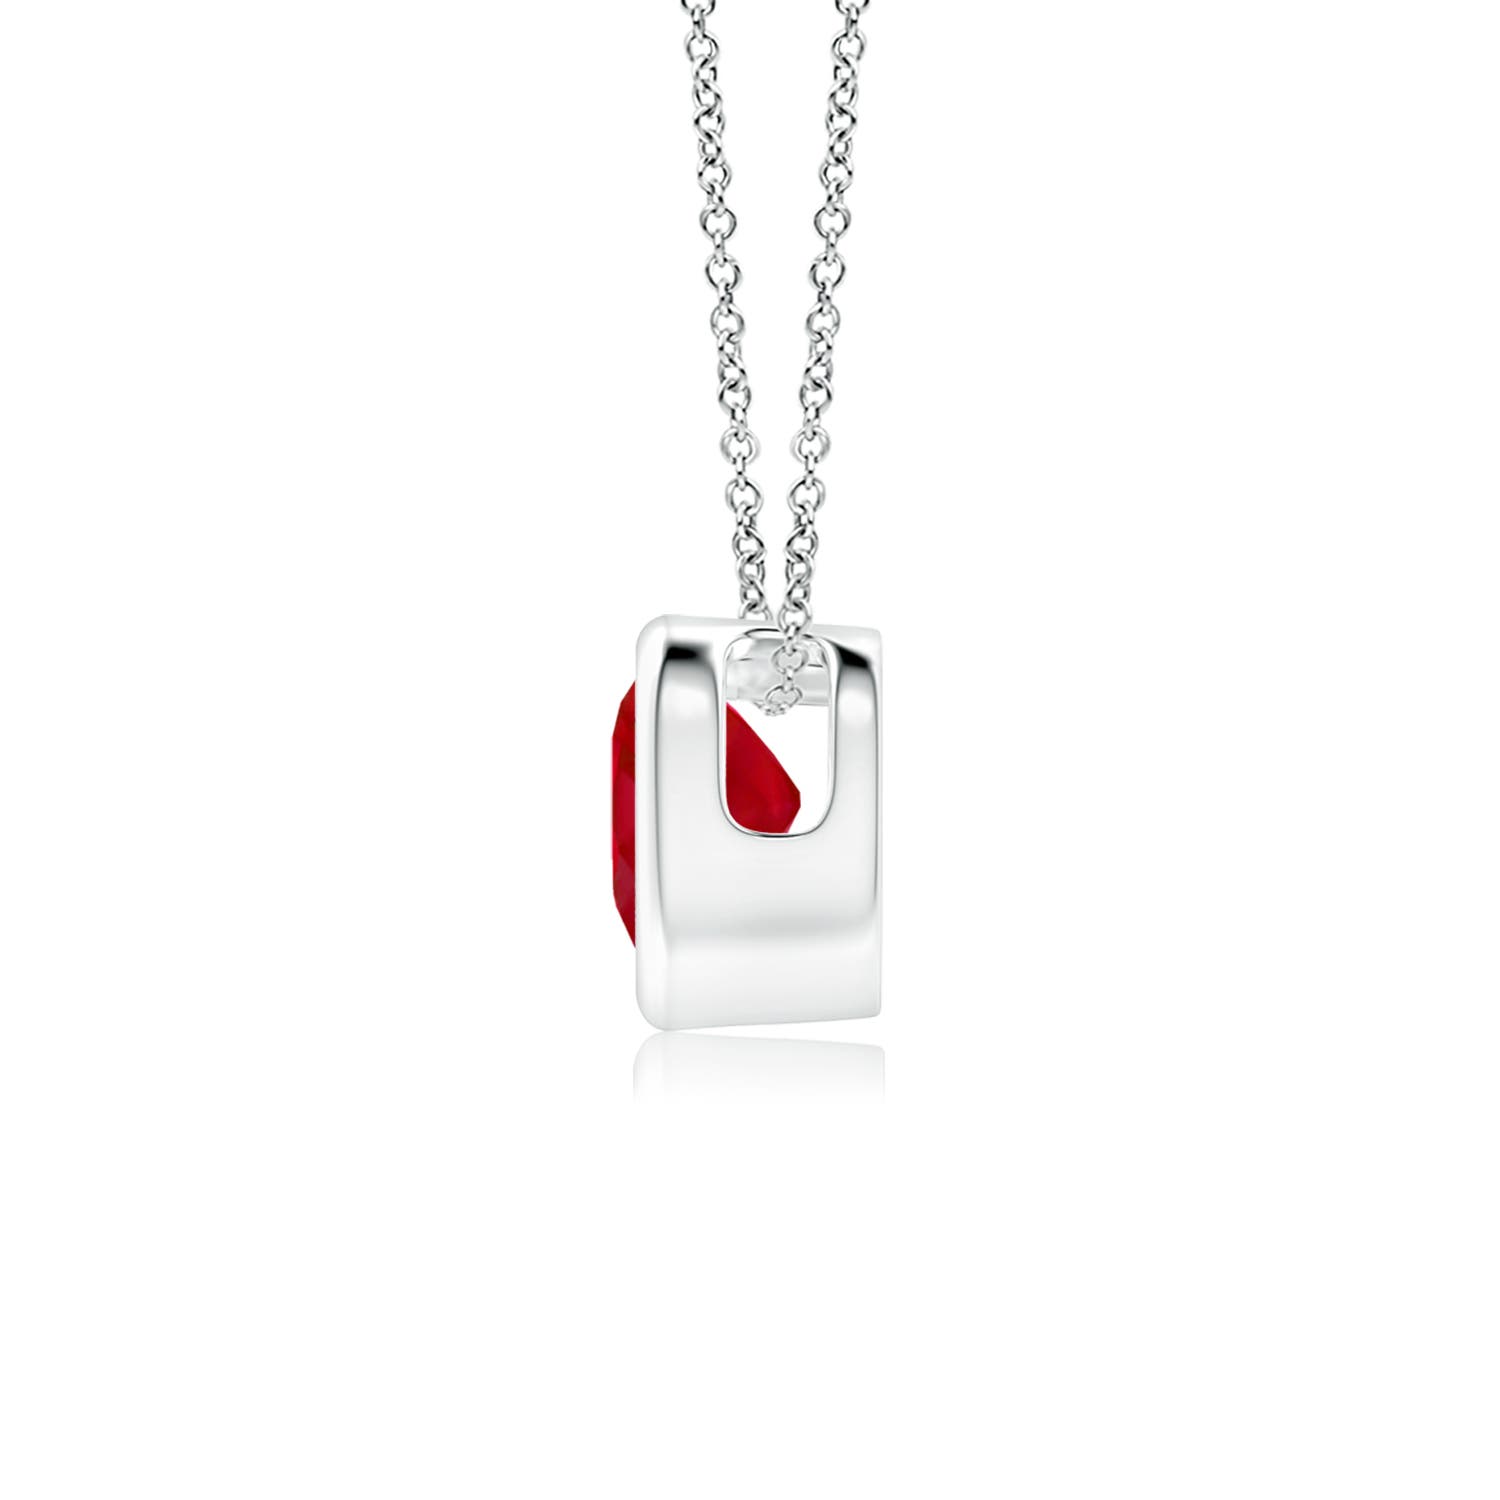 AA - Ruby / 0.3 CT / 14 KT White Gold